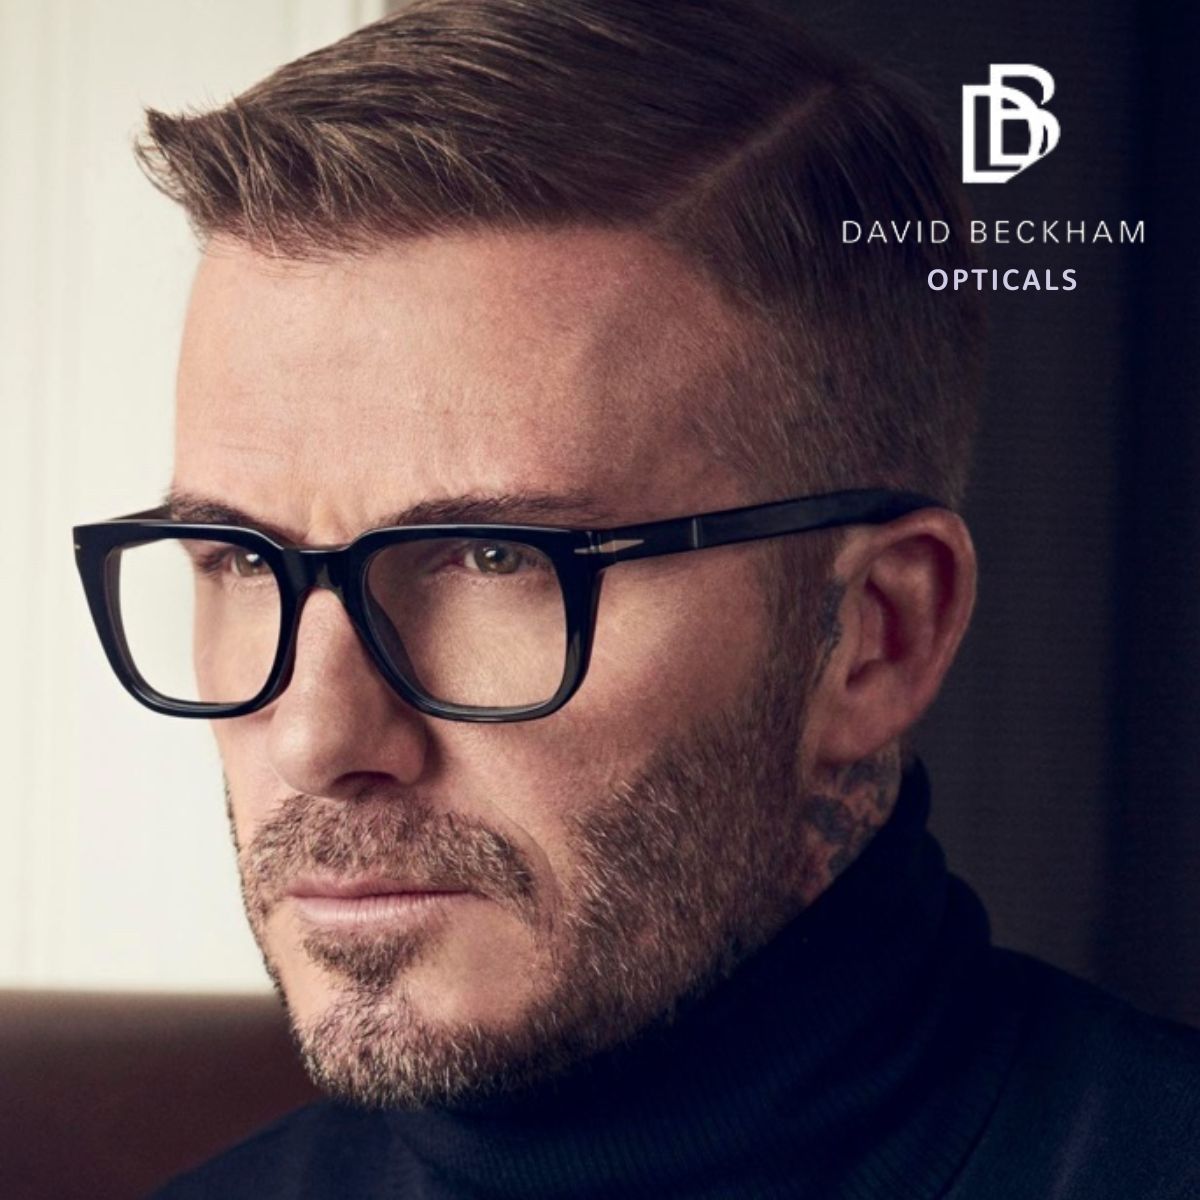 "Shop the latest and trendy David Beckham DB eyewear and optical glasses online at Optorium, the leading luxury eyeglasses retail store."